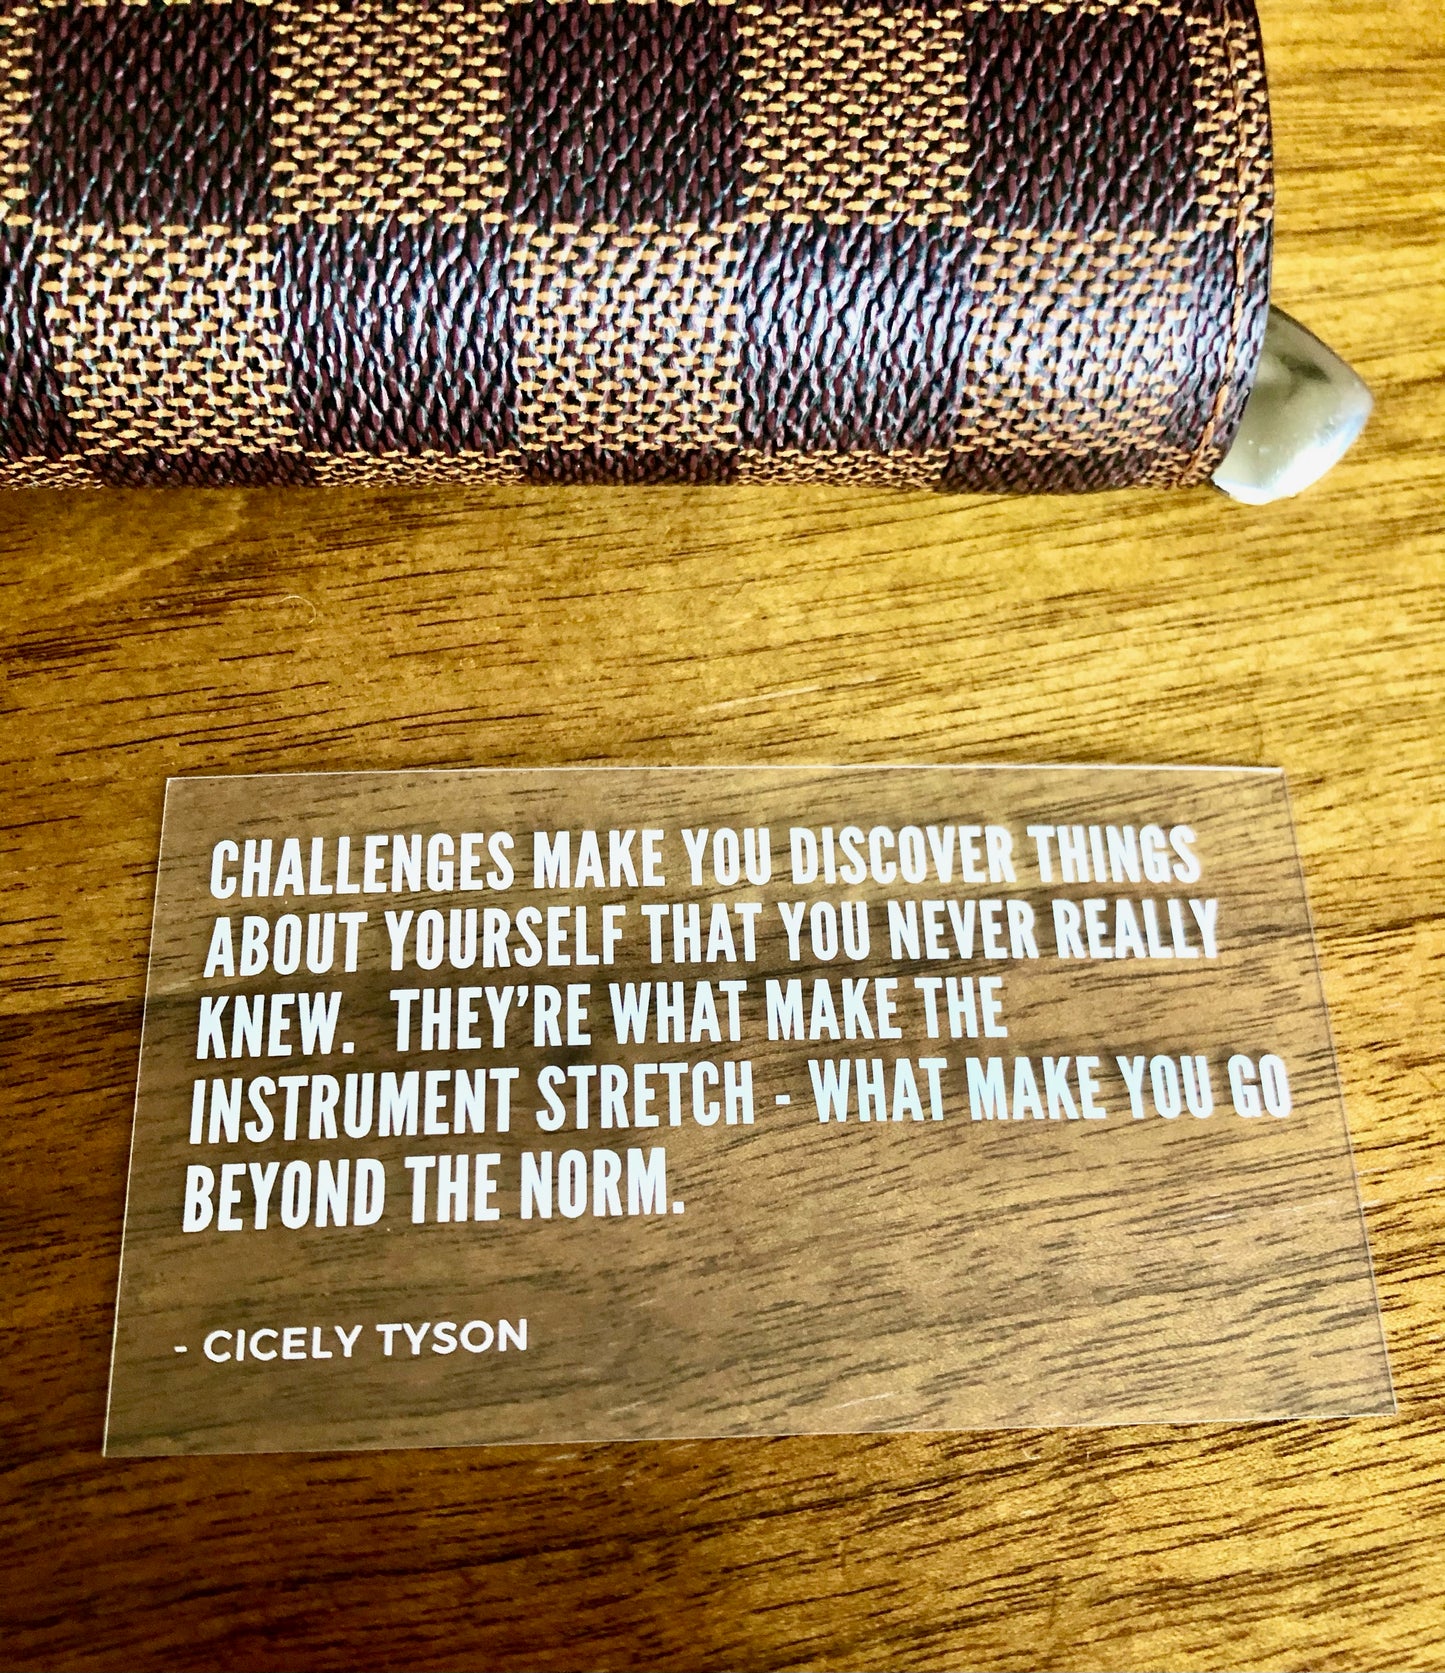 Cicely Tyson "Challenges make you discover things..." Transparent Planner Card